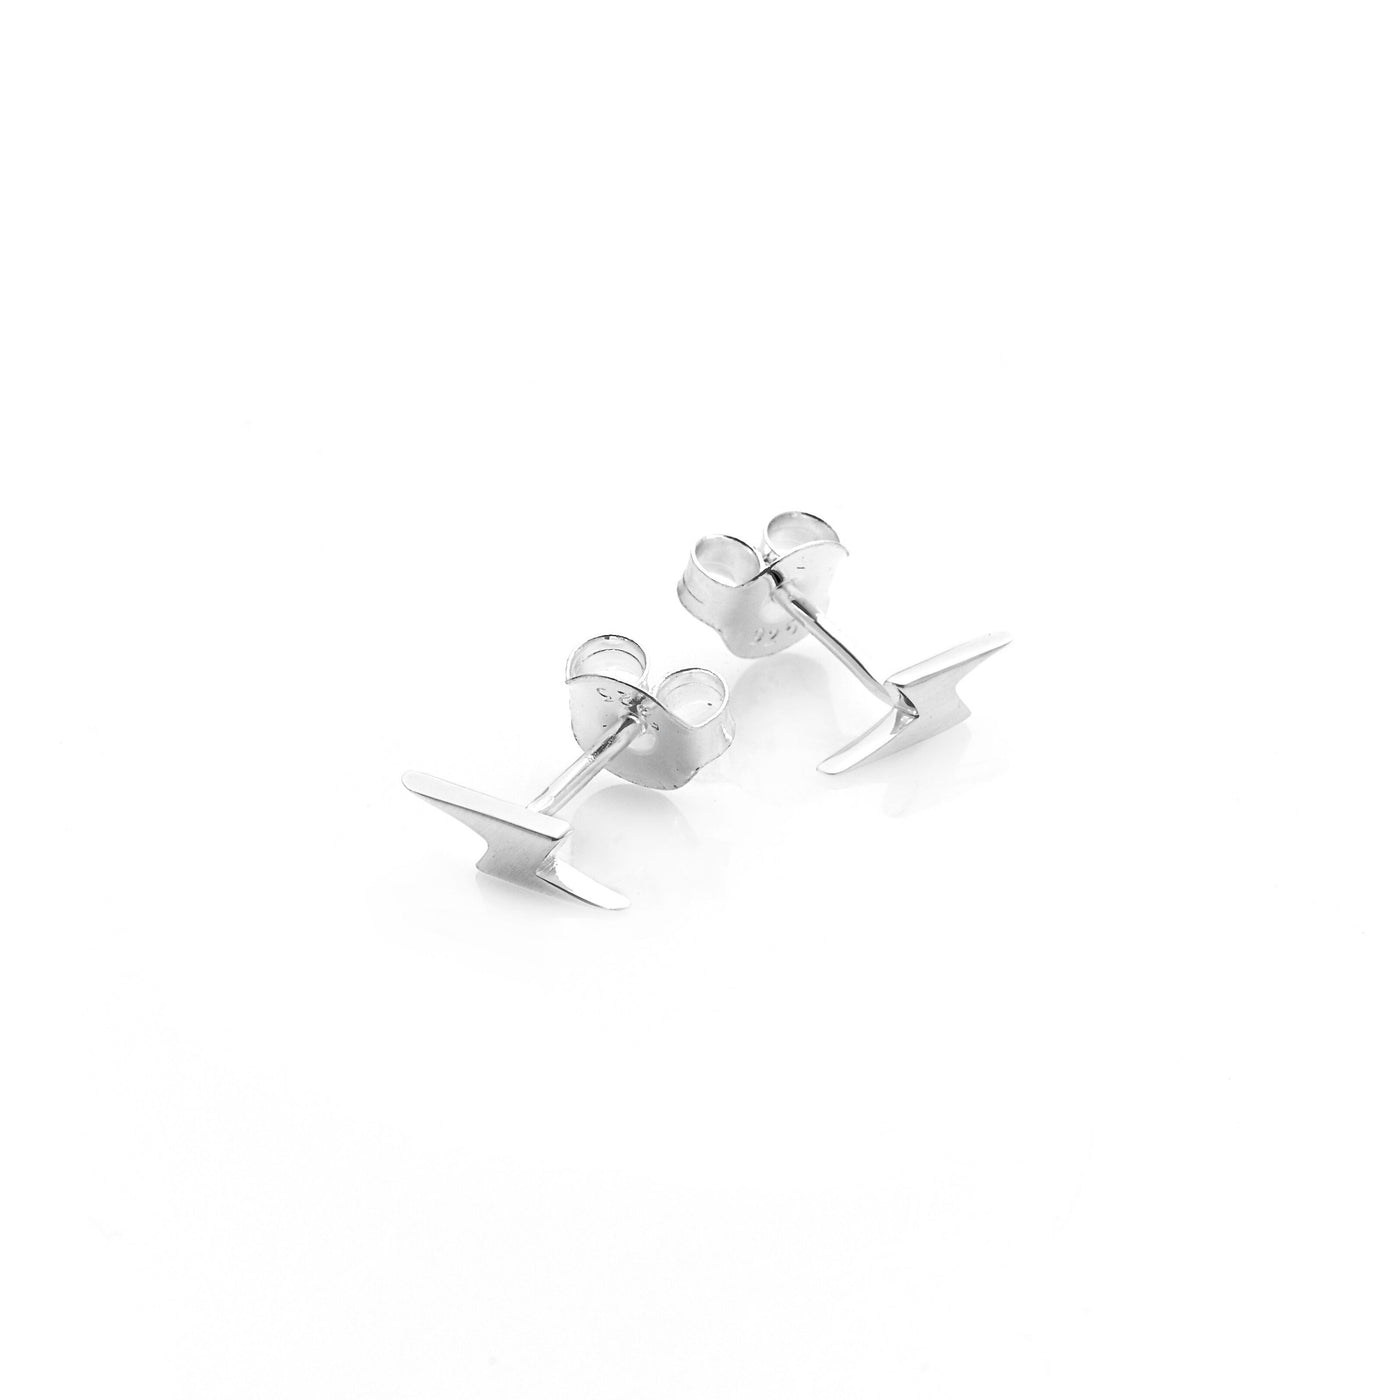 Stolen Girlfriends Club I'll Be Lightening Earrings Stolen Girlfriends Club I'll Be Lightening Earrings are crafted from high polish sterling silver, and are sold as a pair. These little lightening studs are perfect for everyday wear. Wear them solo or mix and match!